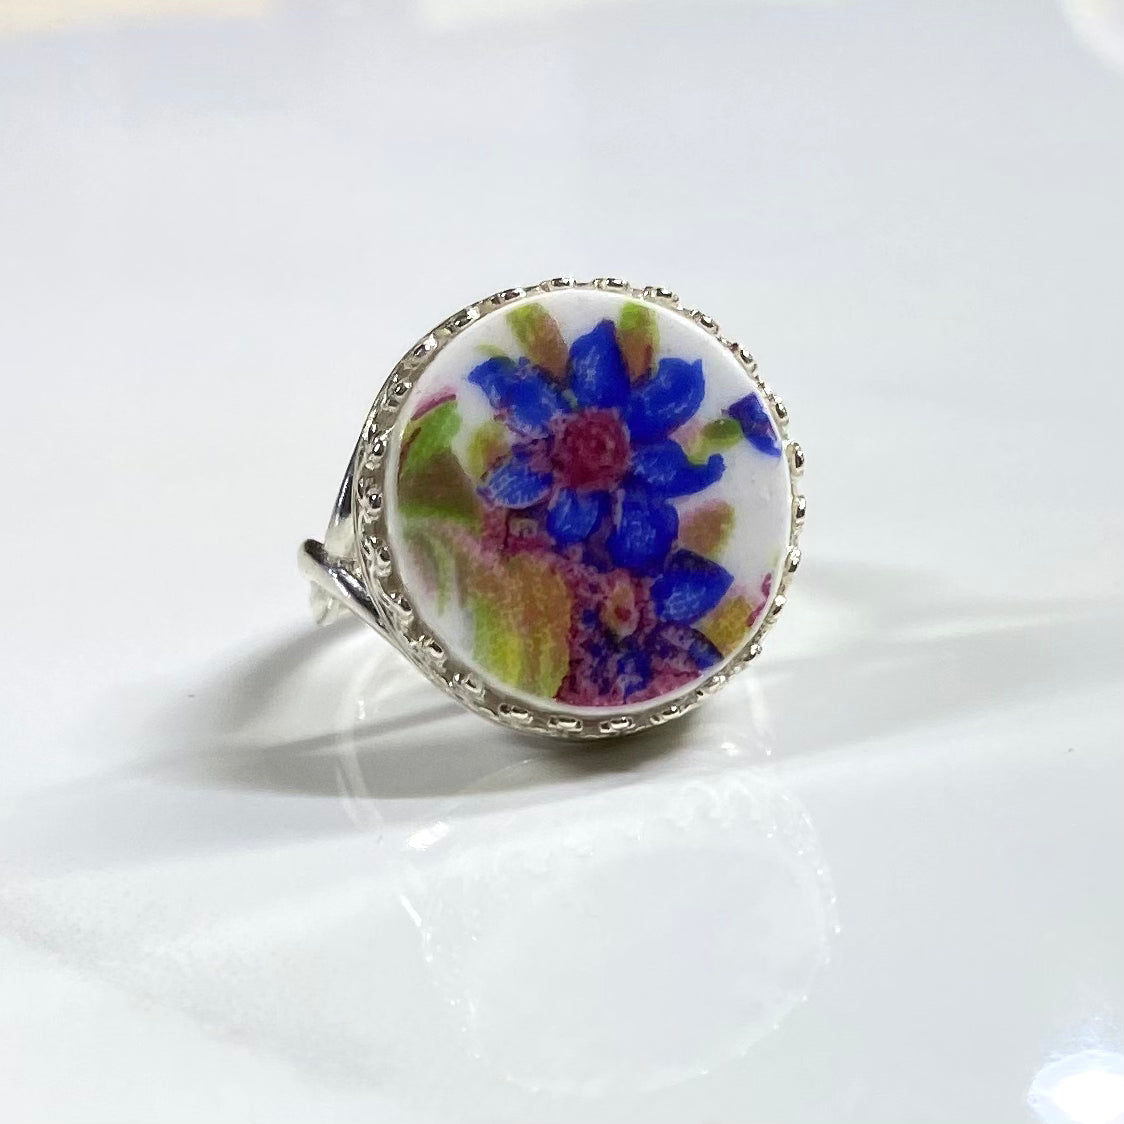 1950’s Roslyn China Sterling Silver Ring